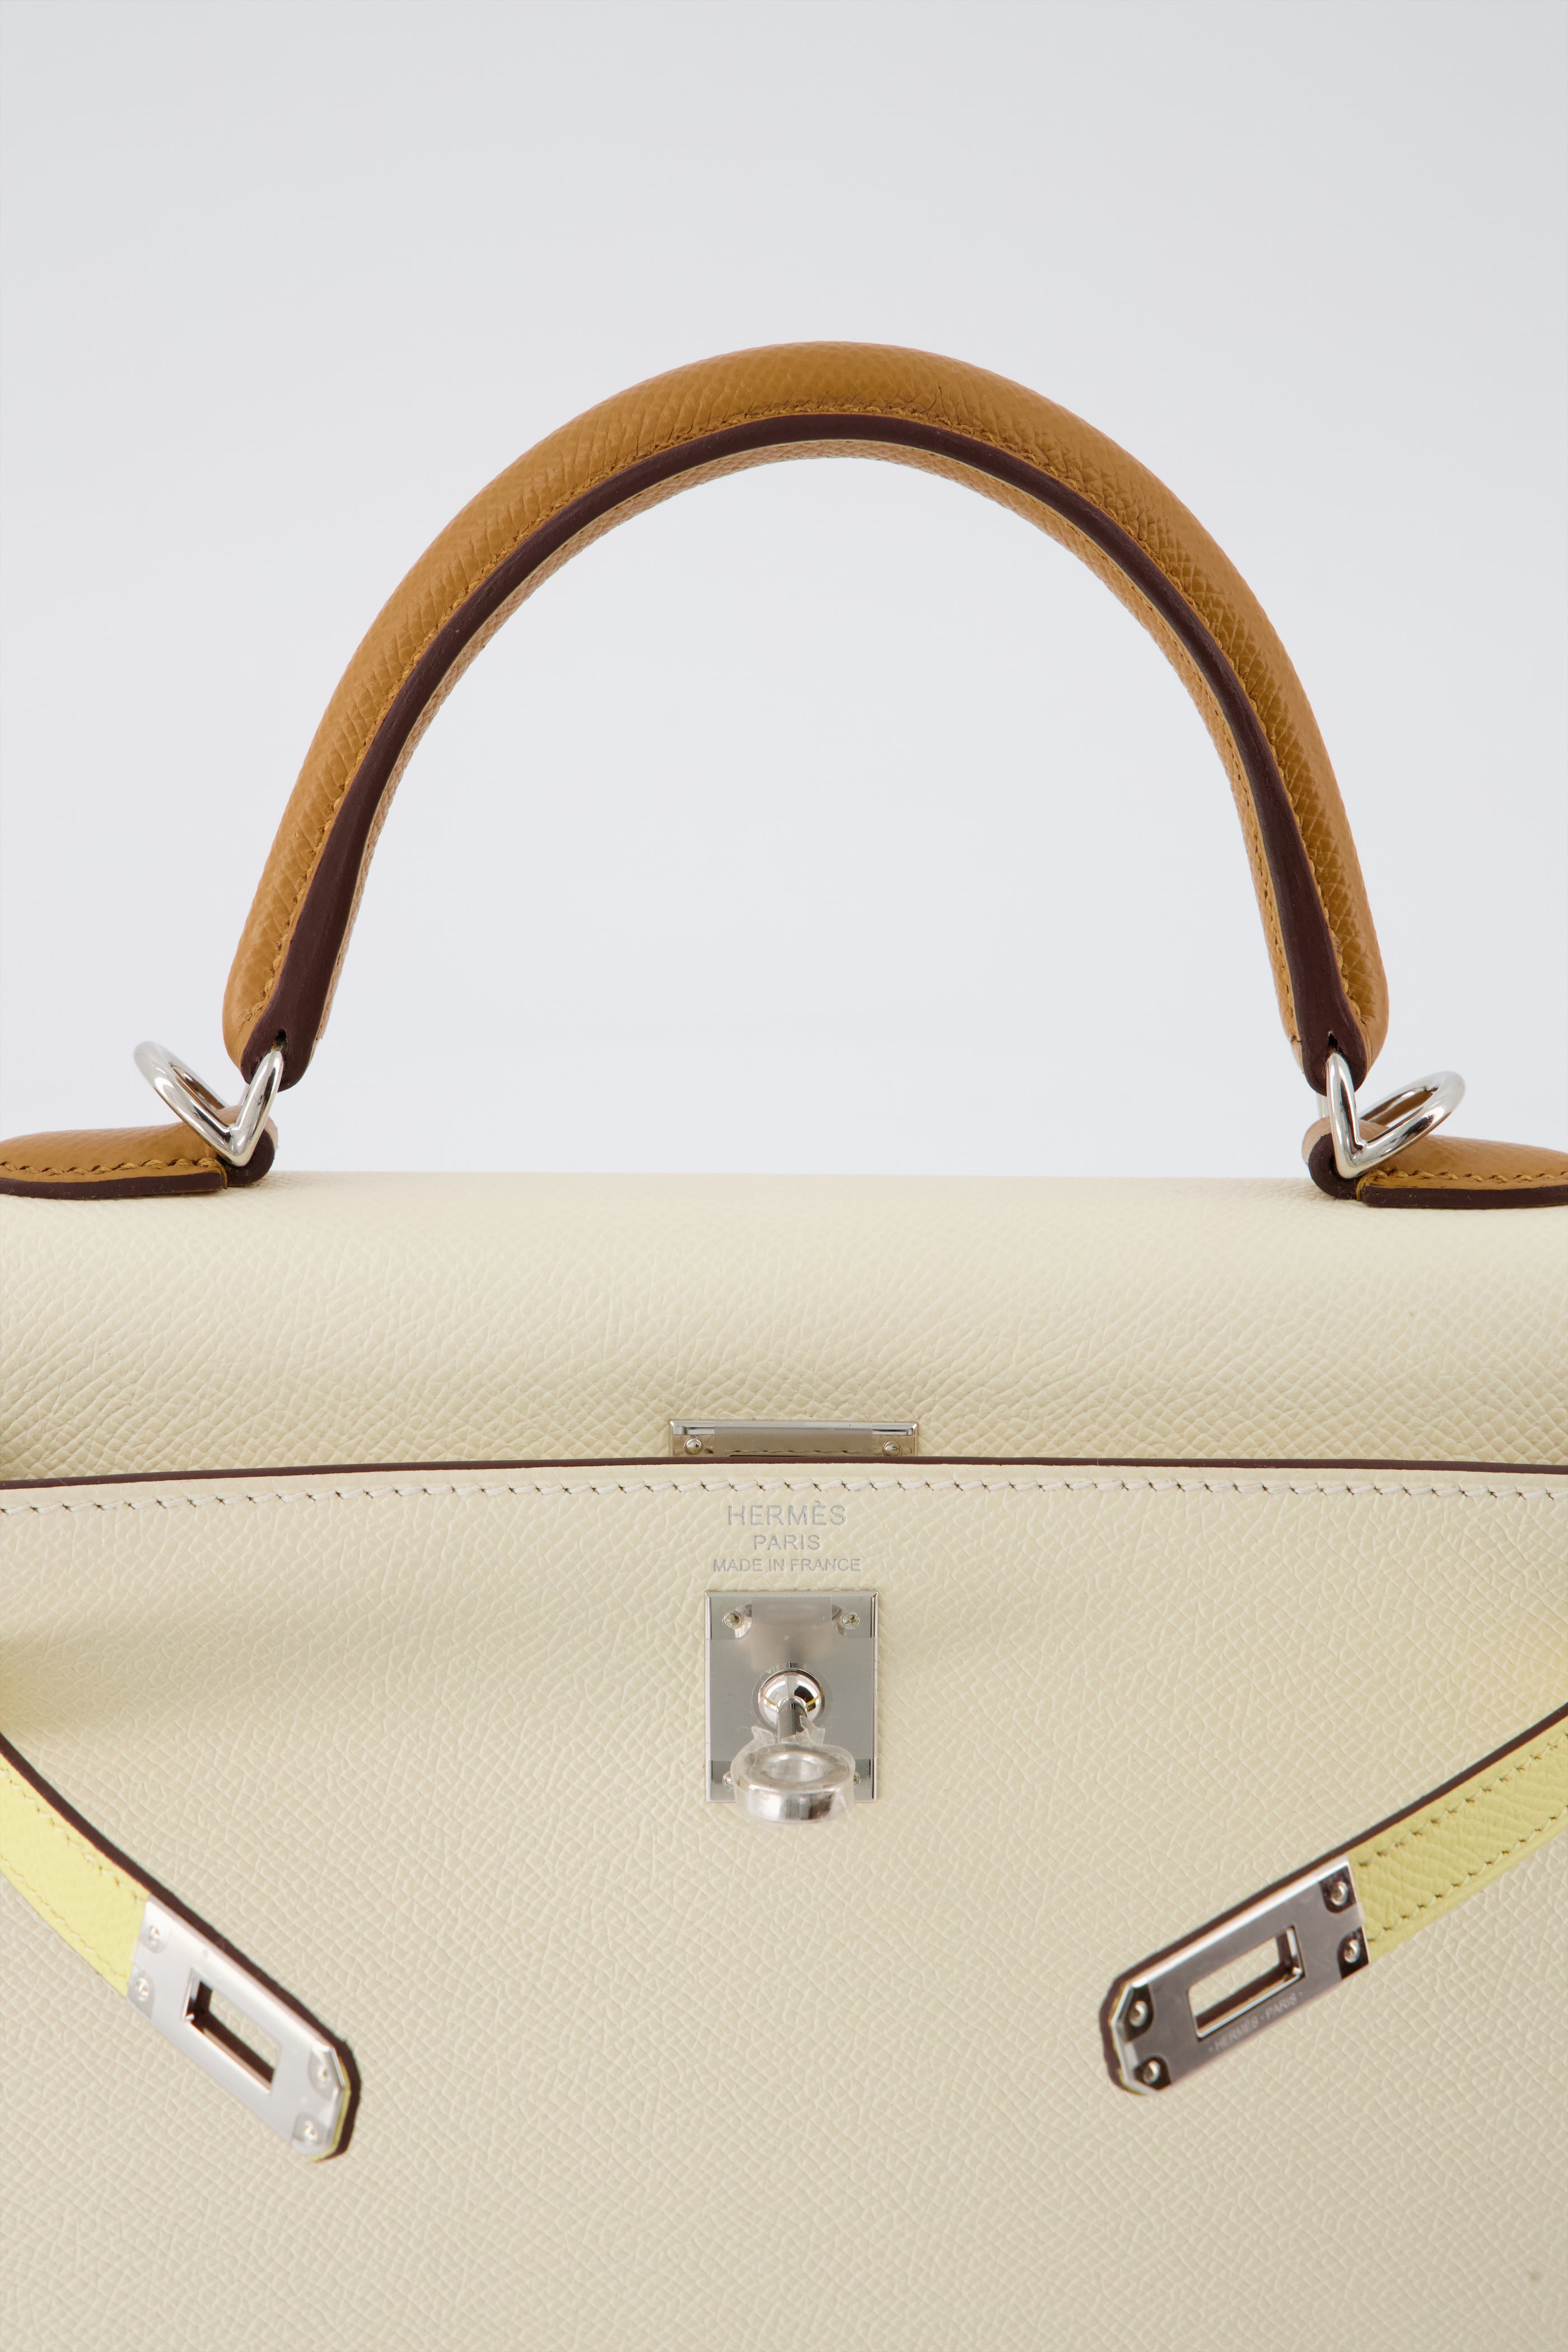 *Limited Edition* Hermes Kelly 25 Sellier Handbag Tri-Colour Nata Sesame Jaune Poussin.  Epsom Leather With Gold Hardware